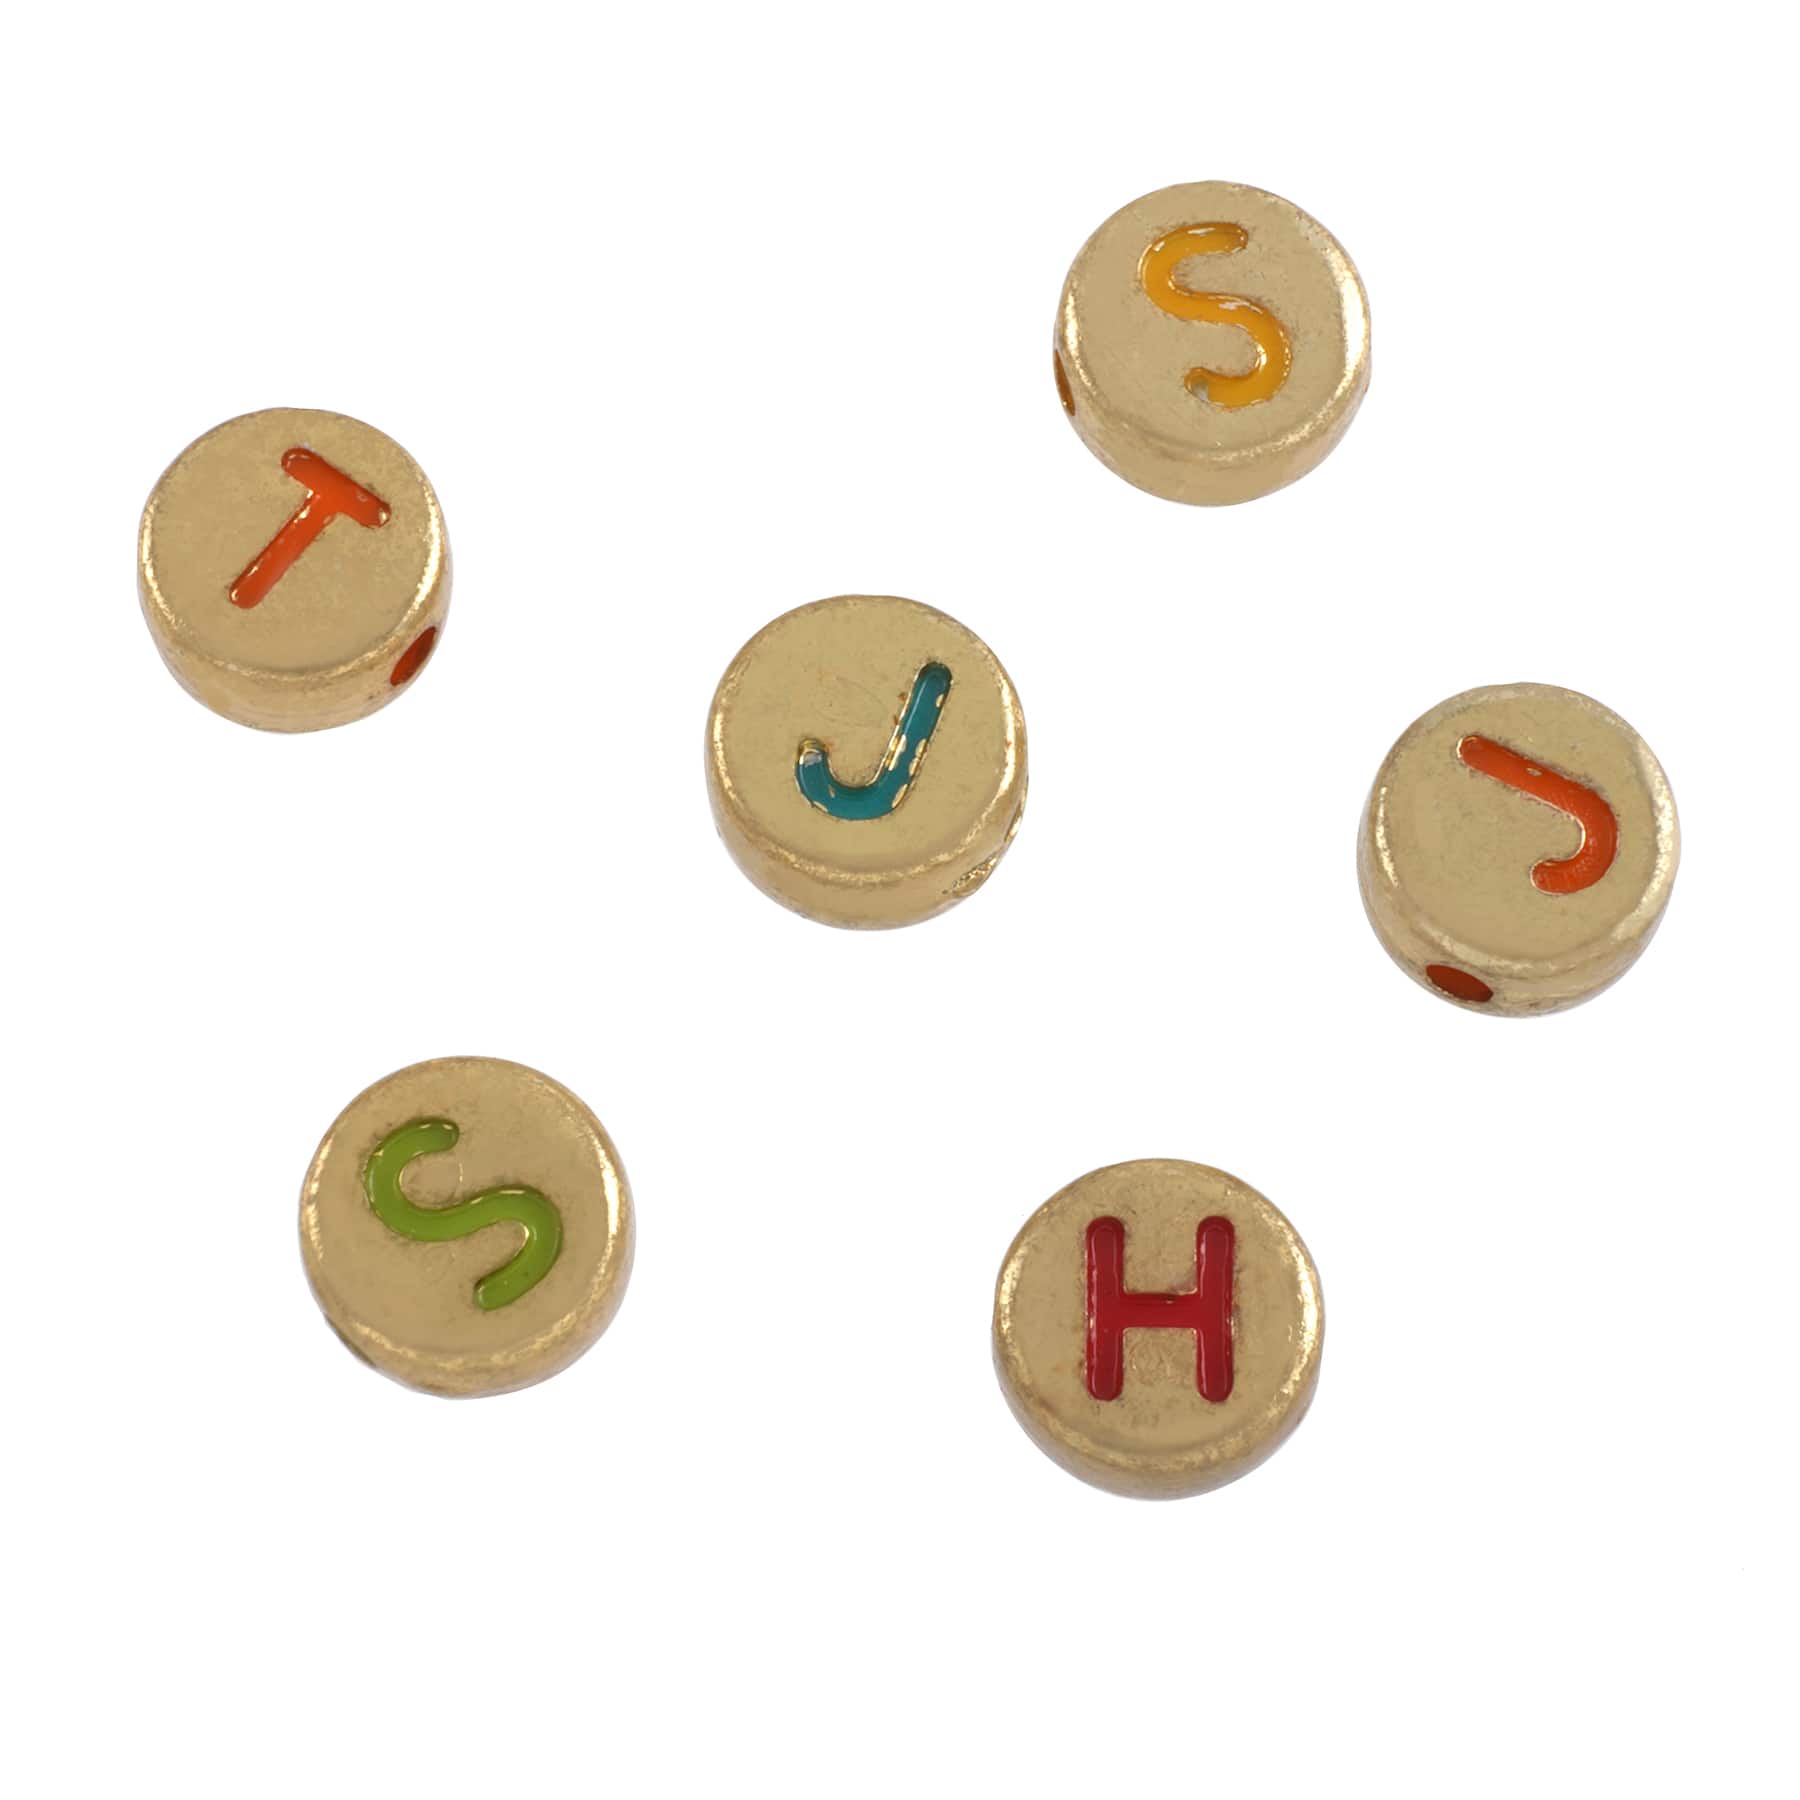 1000pcs Acrylic Small Letter Beads Round Letter Beads Colorful Acrylic with Gold Letter Alphabet for Jewelry Making Alphabet Beads (Colorful Gold